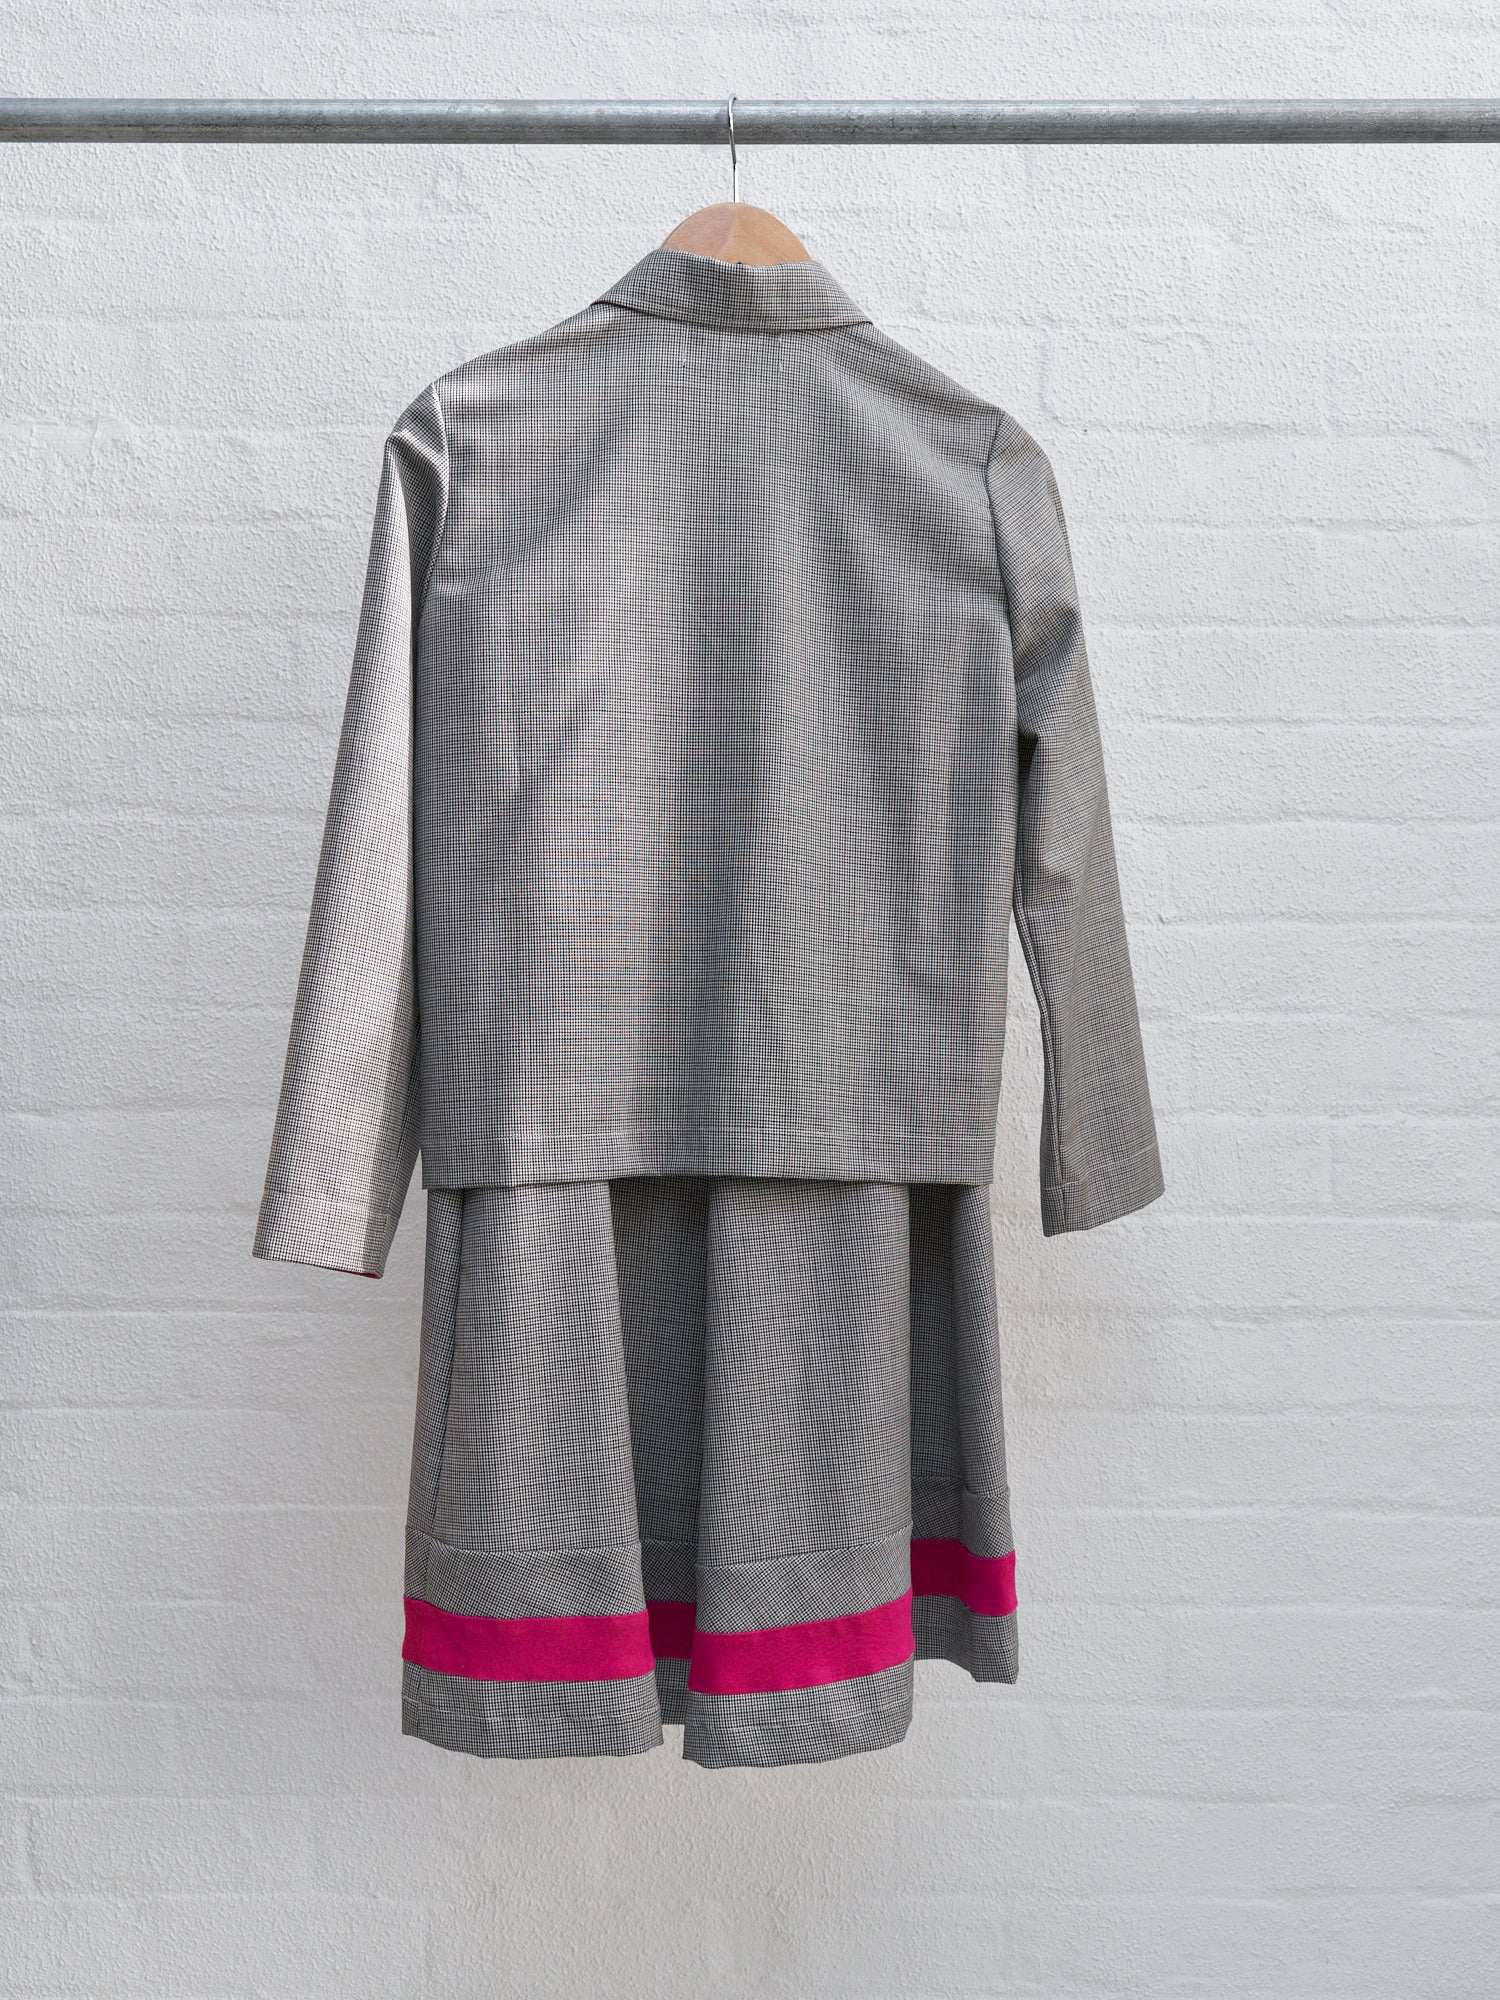 Tricot Comme des Garcons 2000 grey wool pink contrast skirt suit - womens M